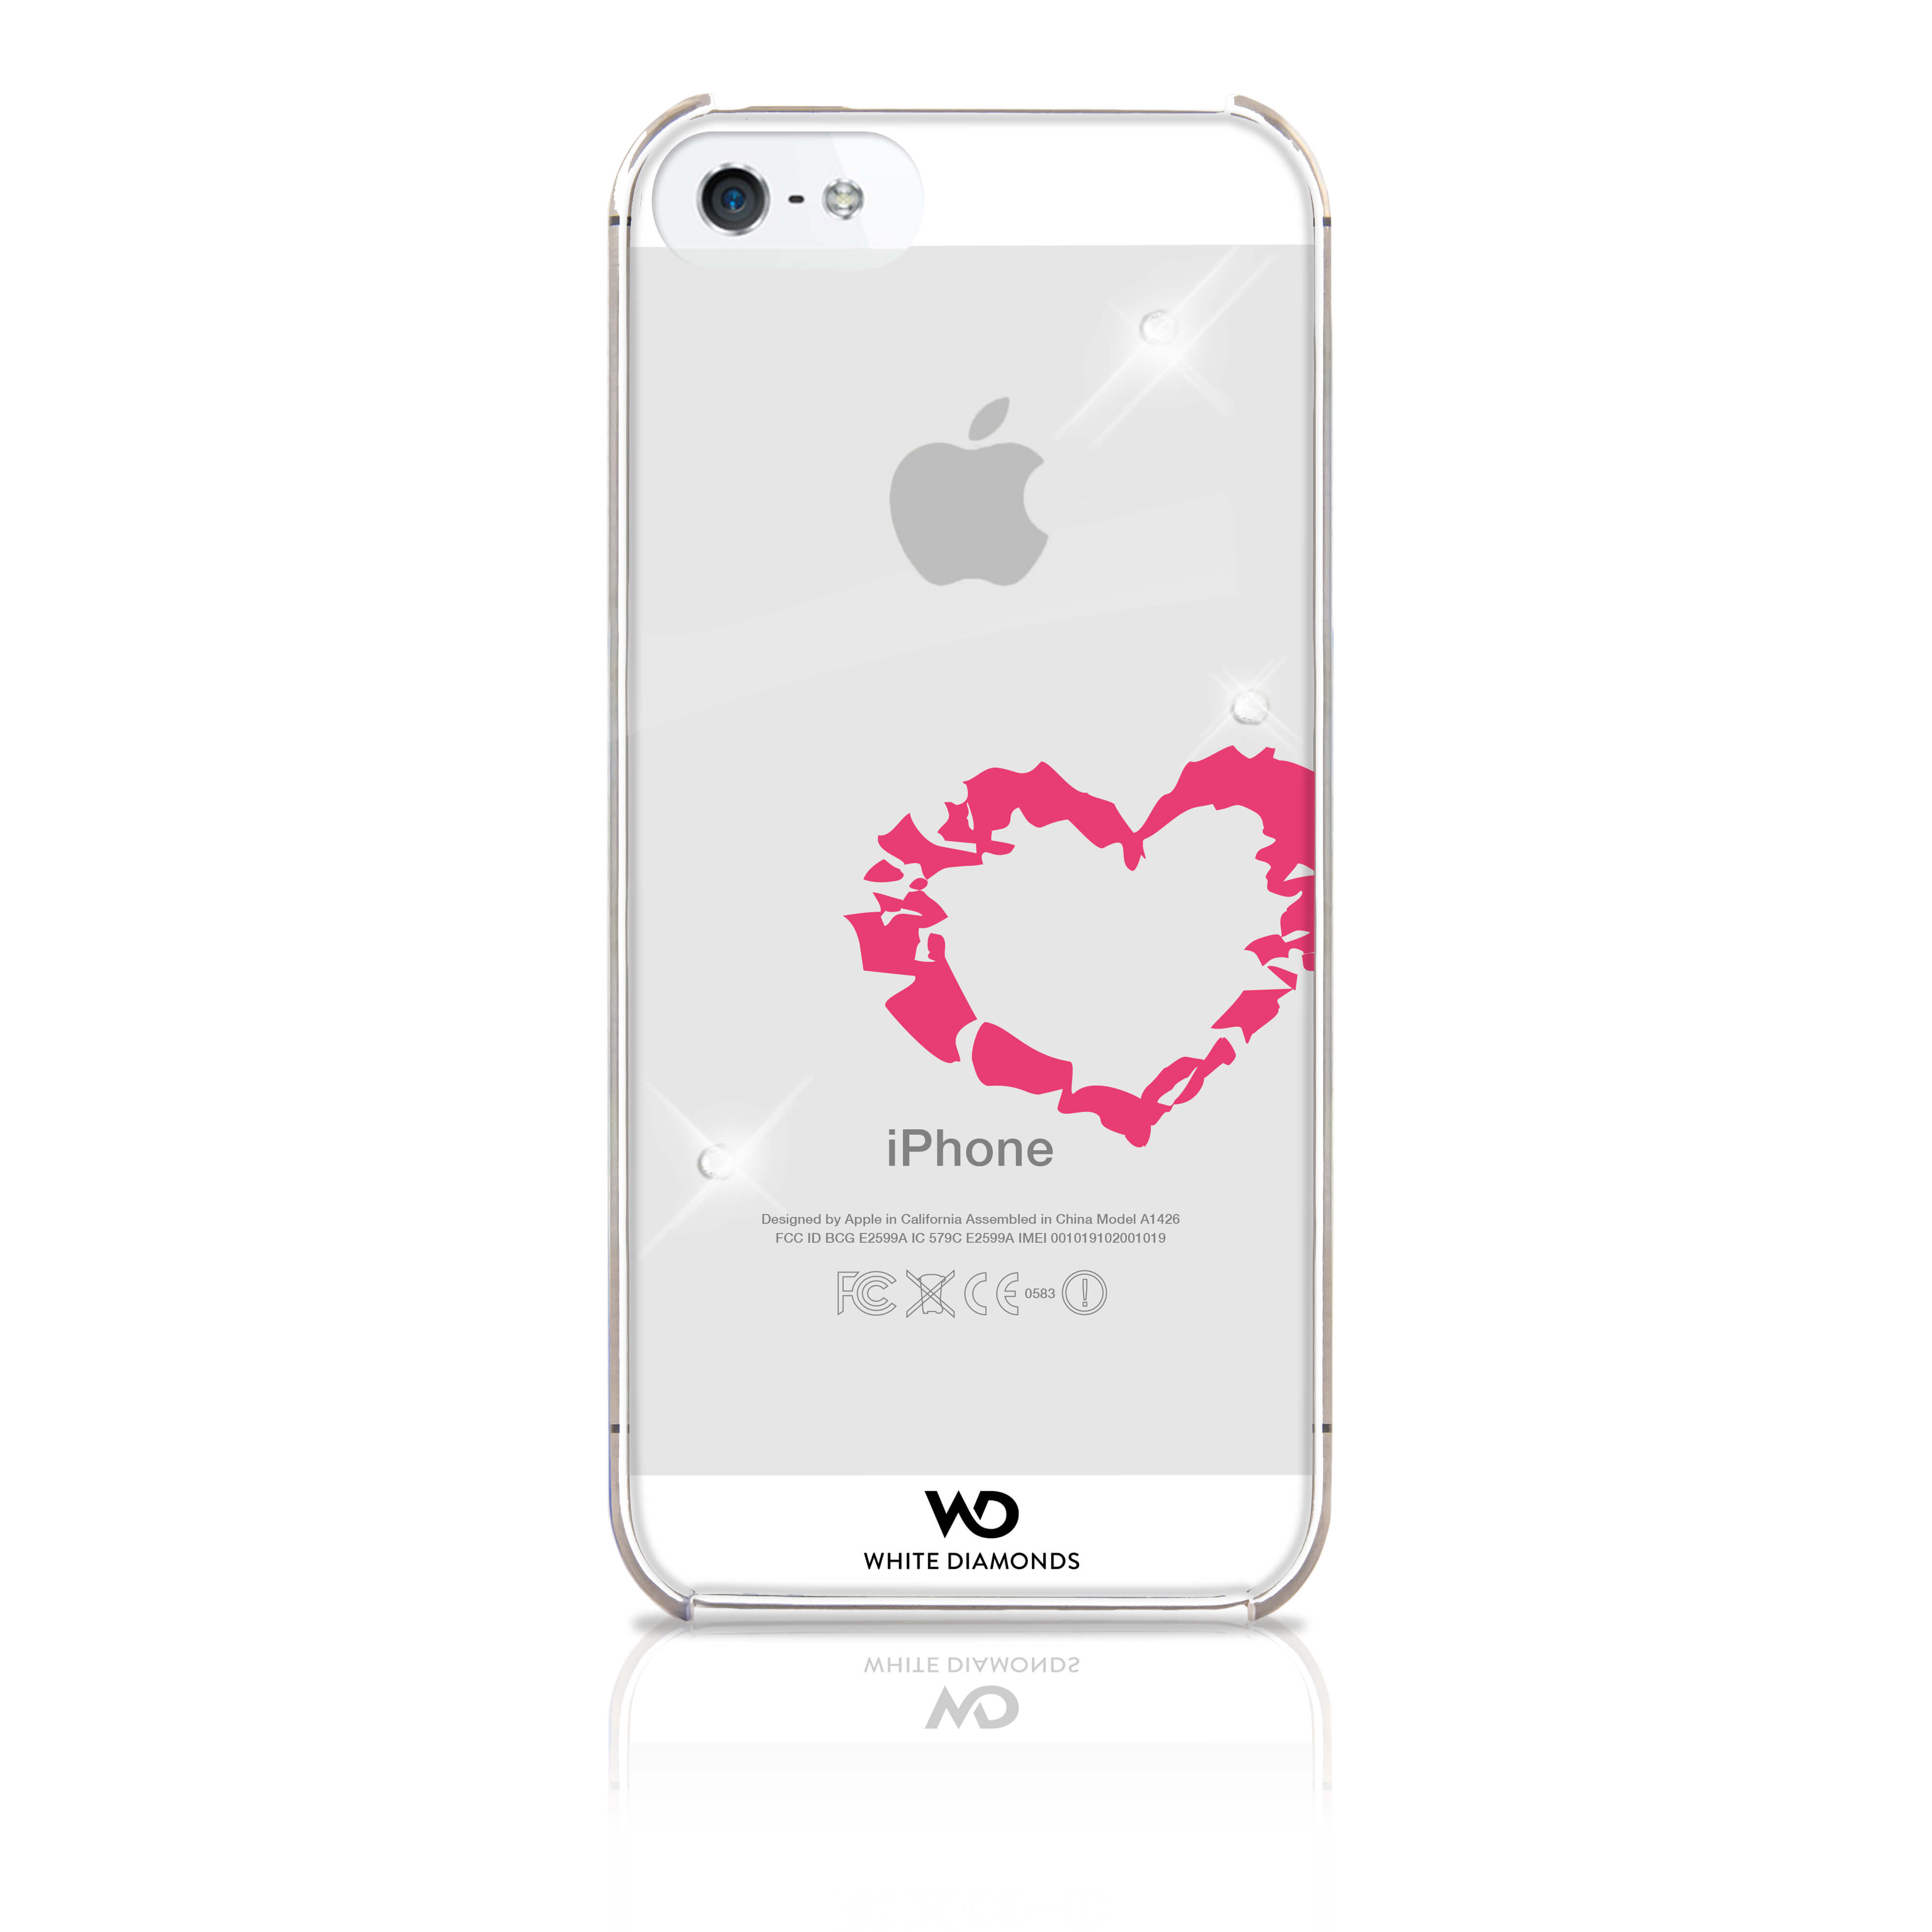 Lipstick Heart Mobile Phone C over for Apple iPhone 5/5s, re